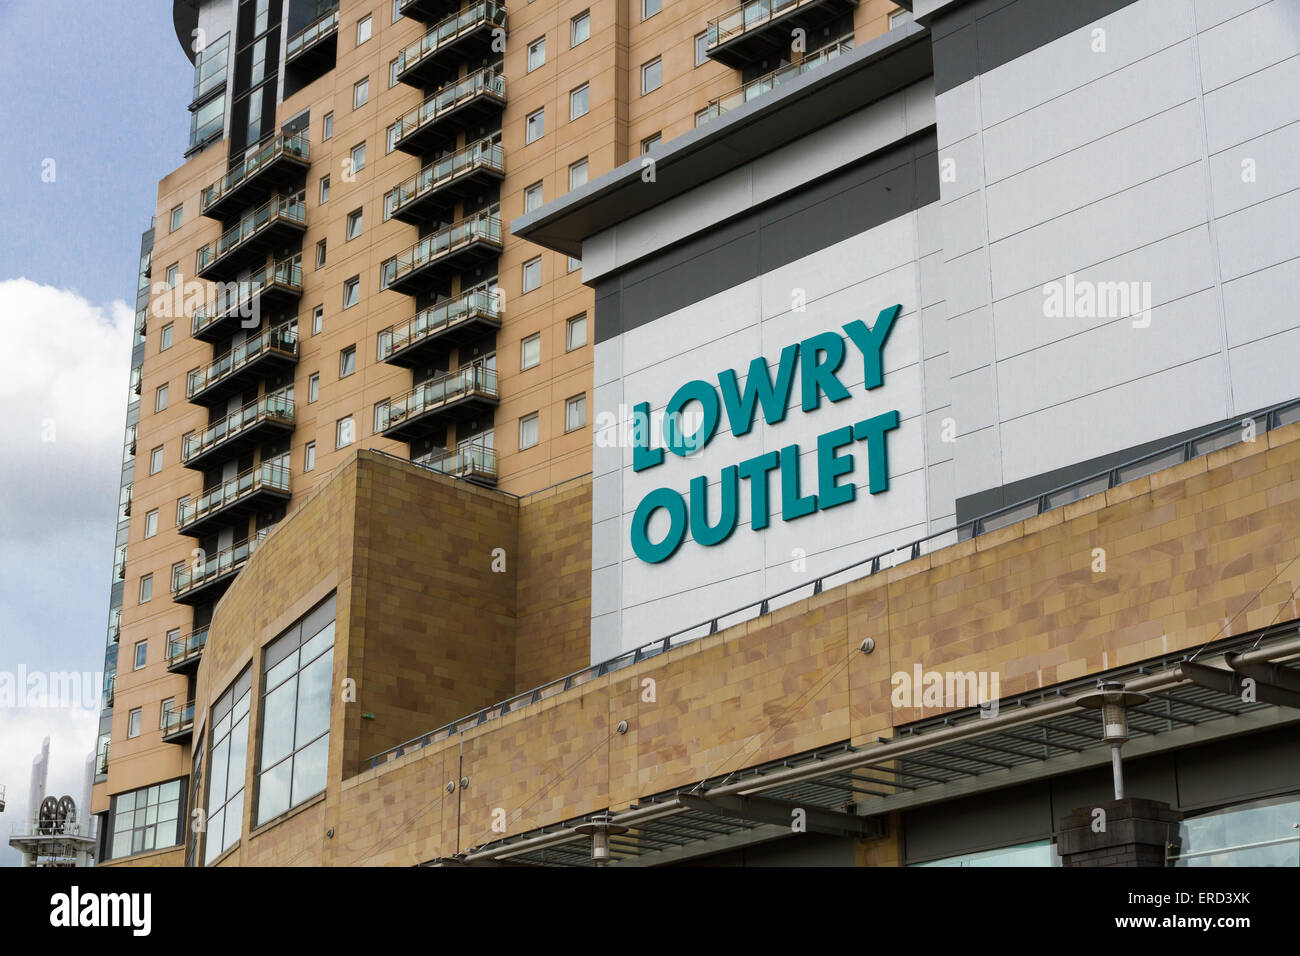 The Lowry Outlet Shopping Mall in MediaCity, Salford Quays. Stock Photo